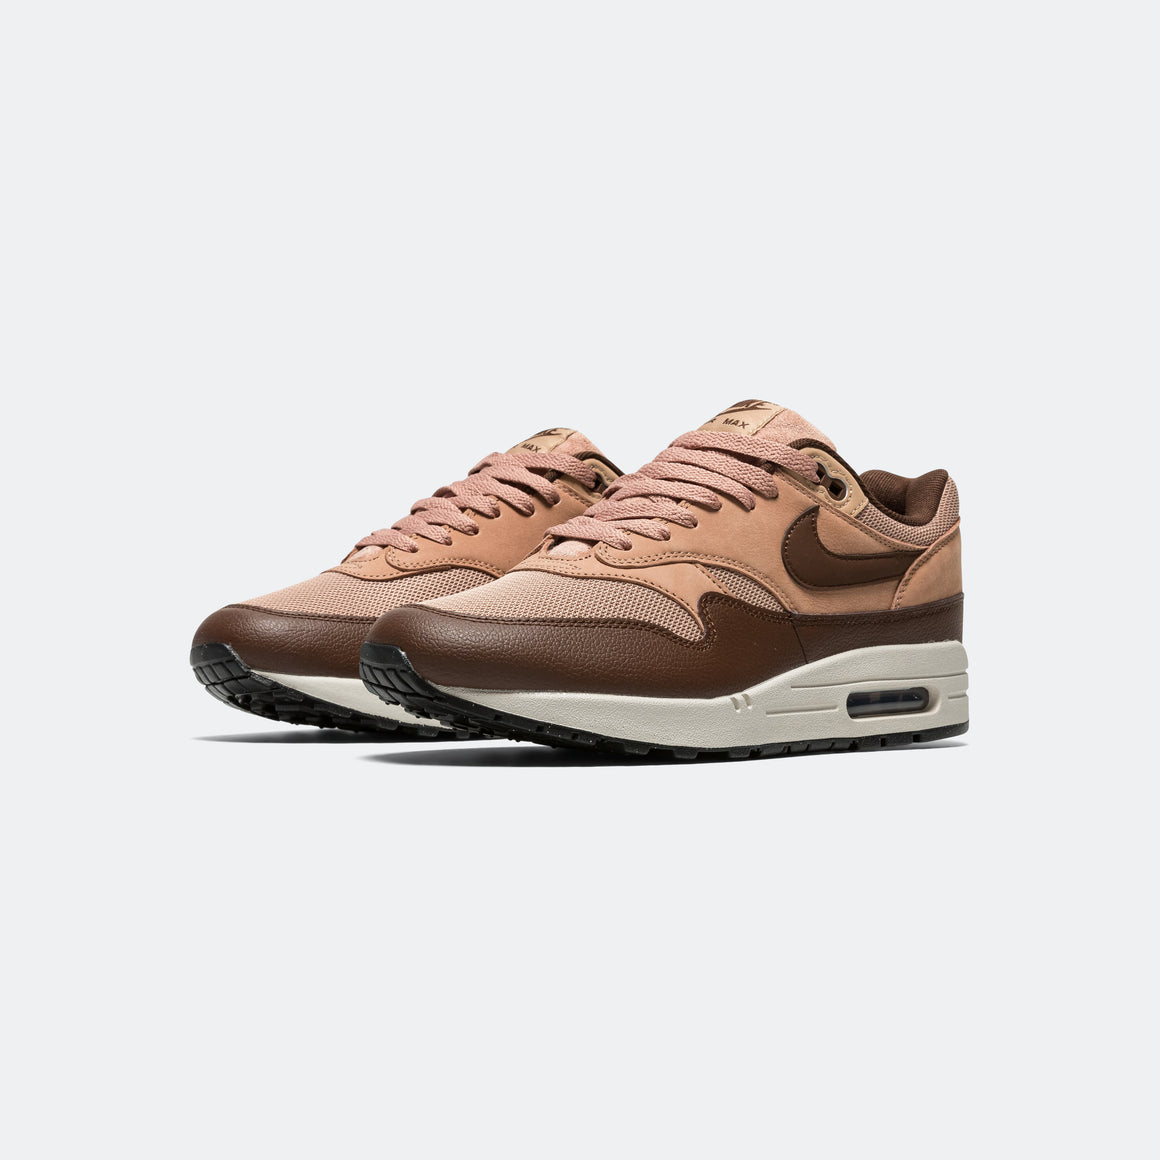 Nike - Air Max 1 SC - Hemp/Cacao Wow-Dusted Clay - UP THERE